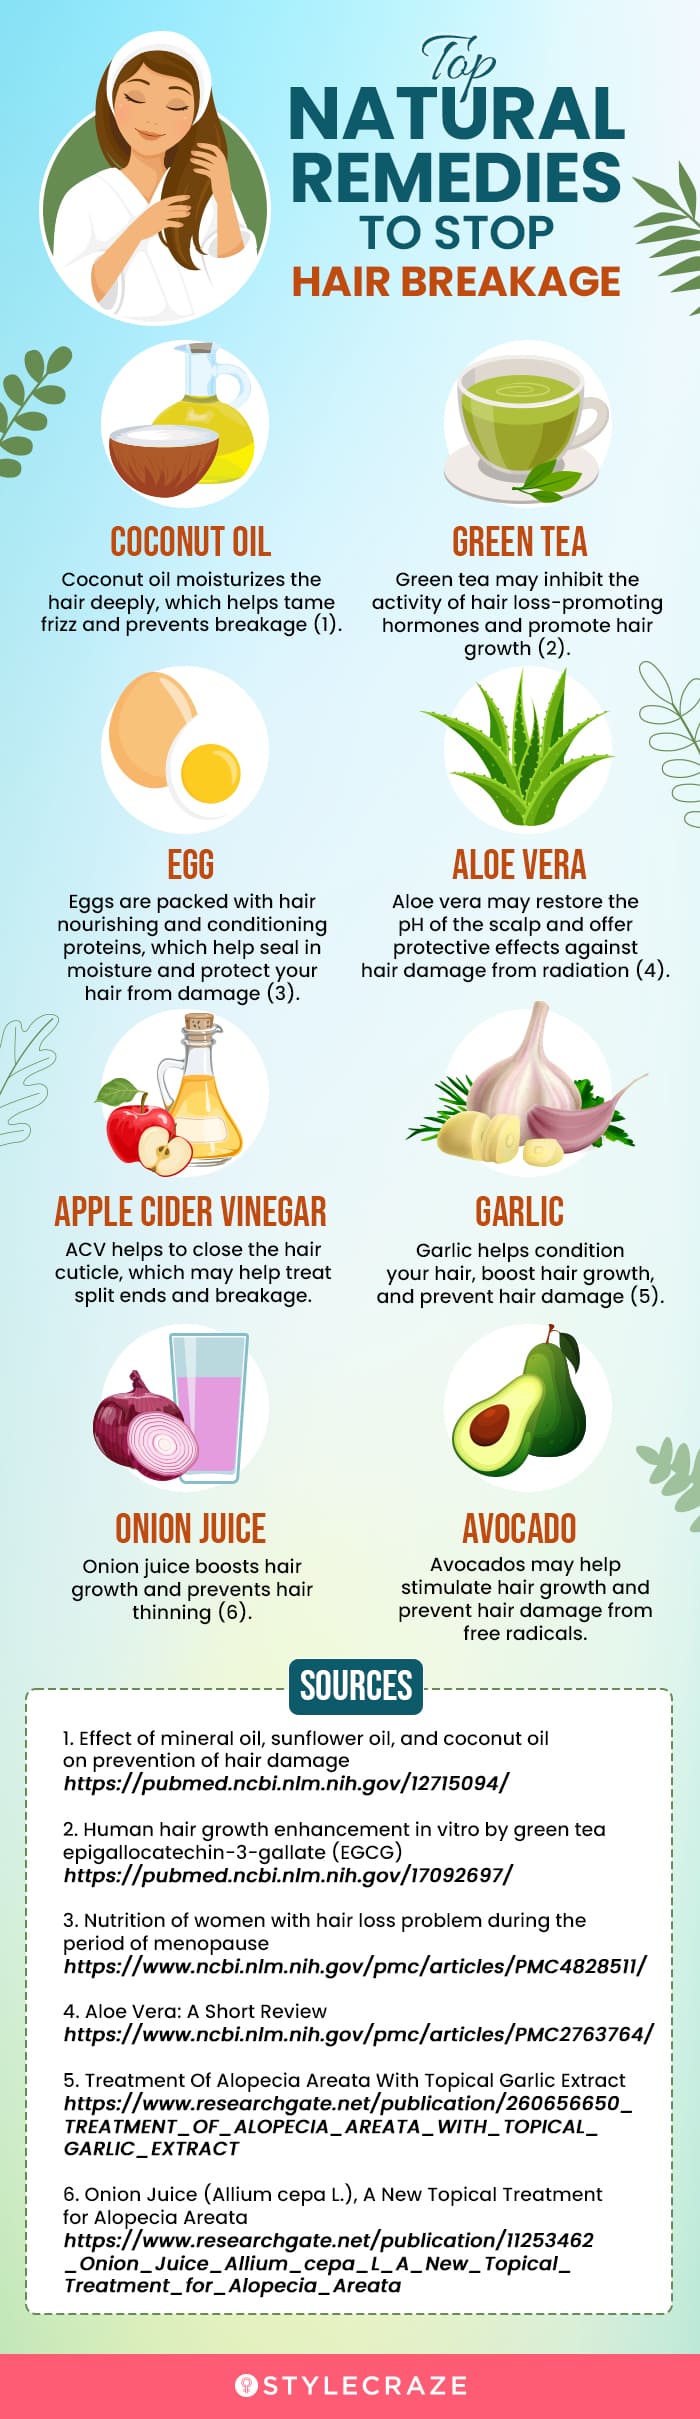 remedies to stop hair breakage (infographic)